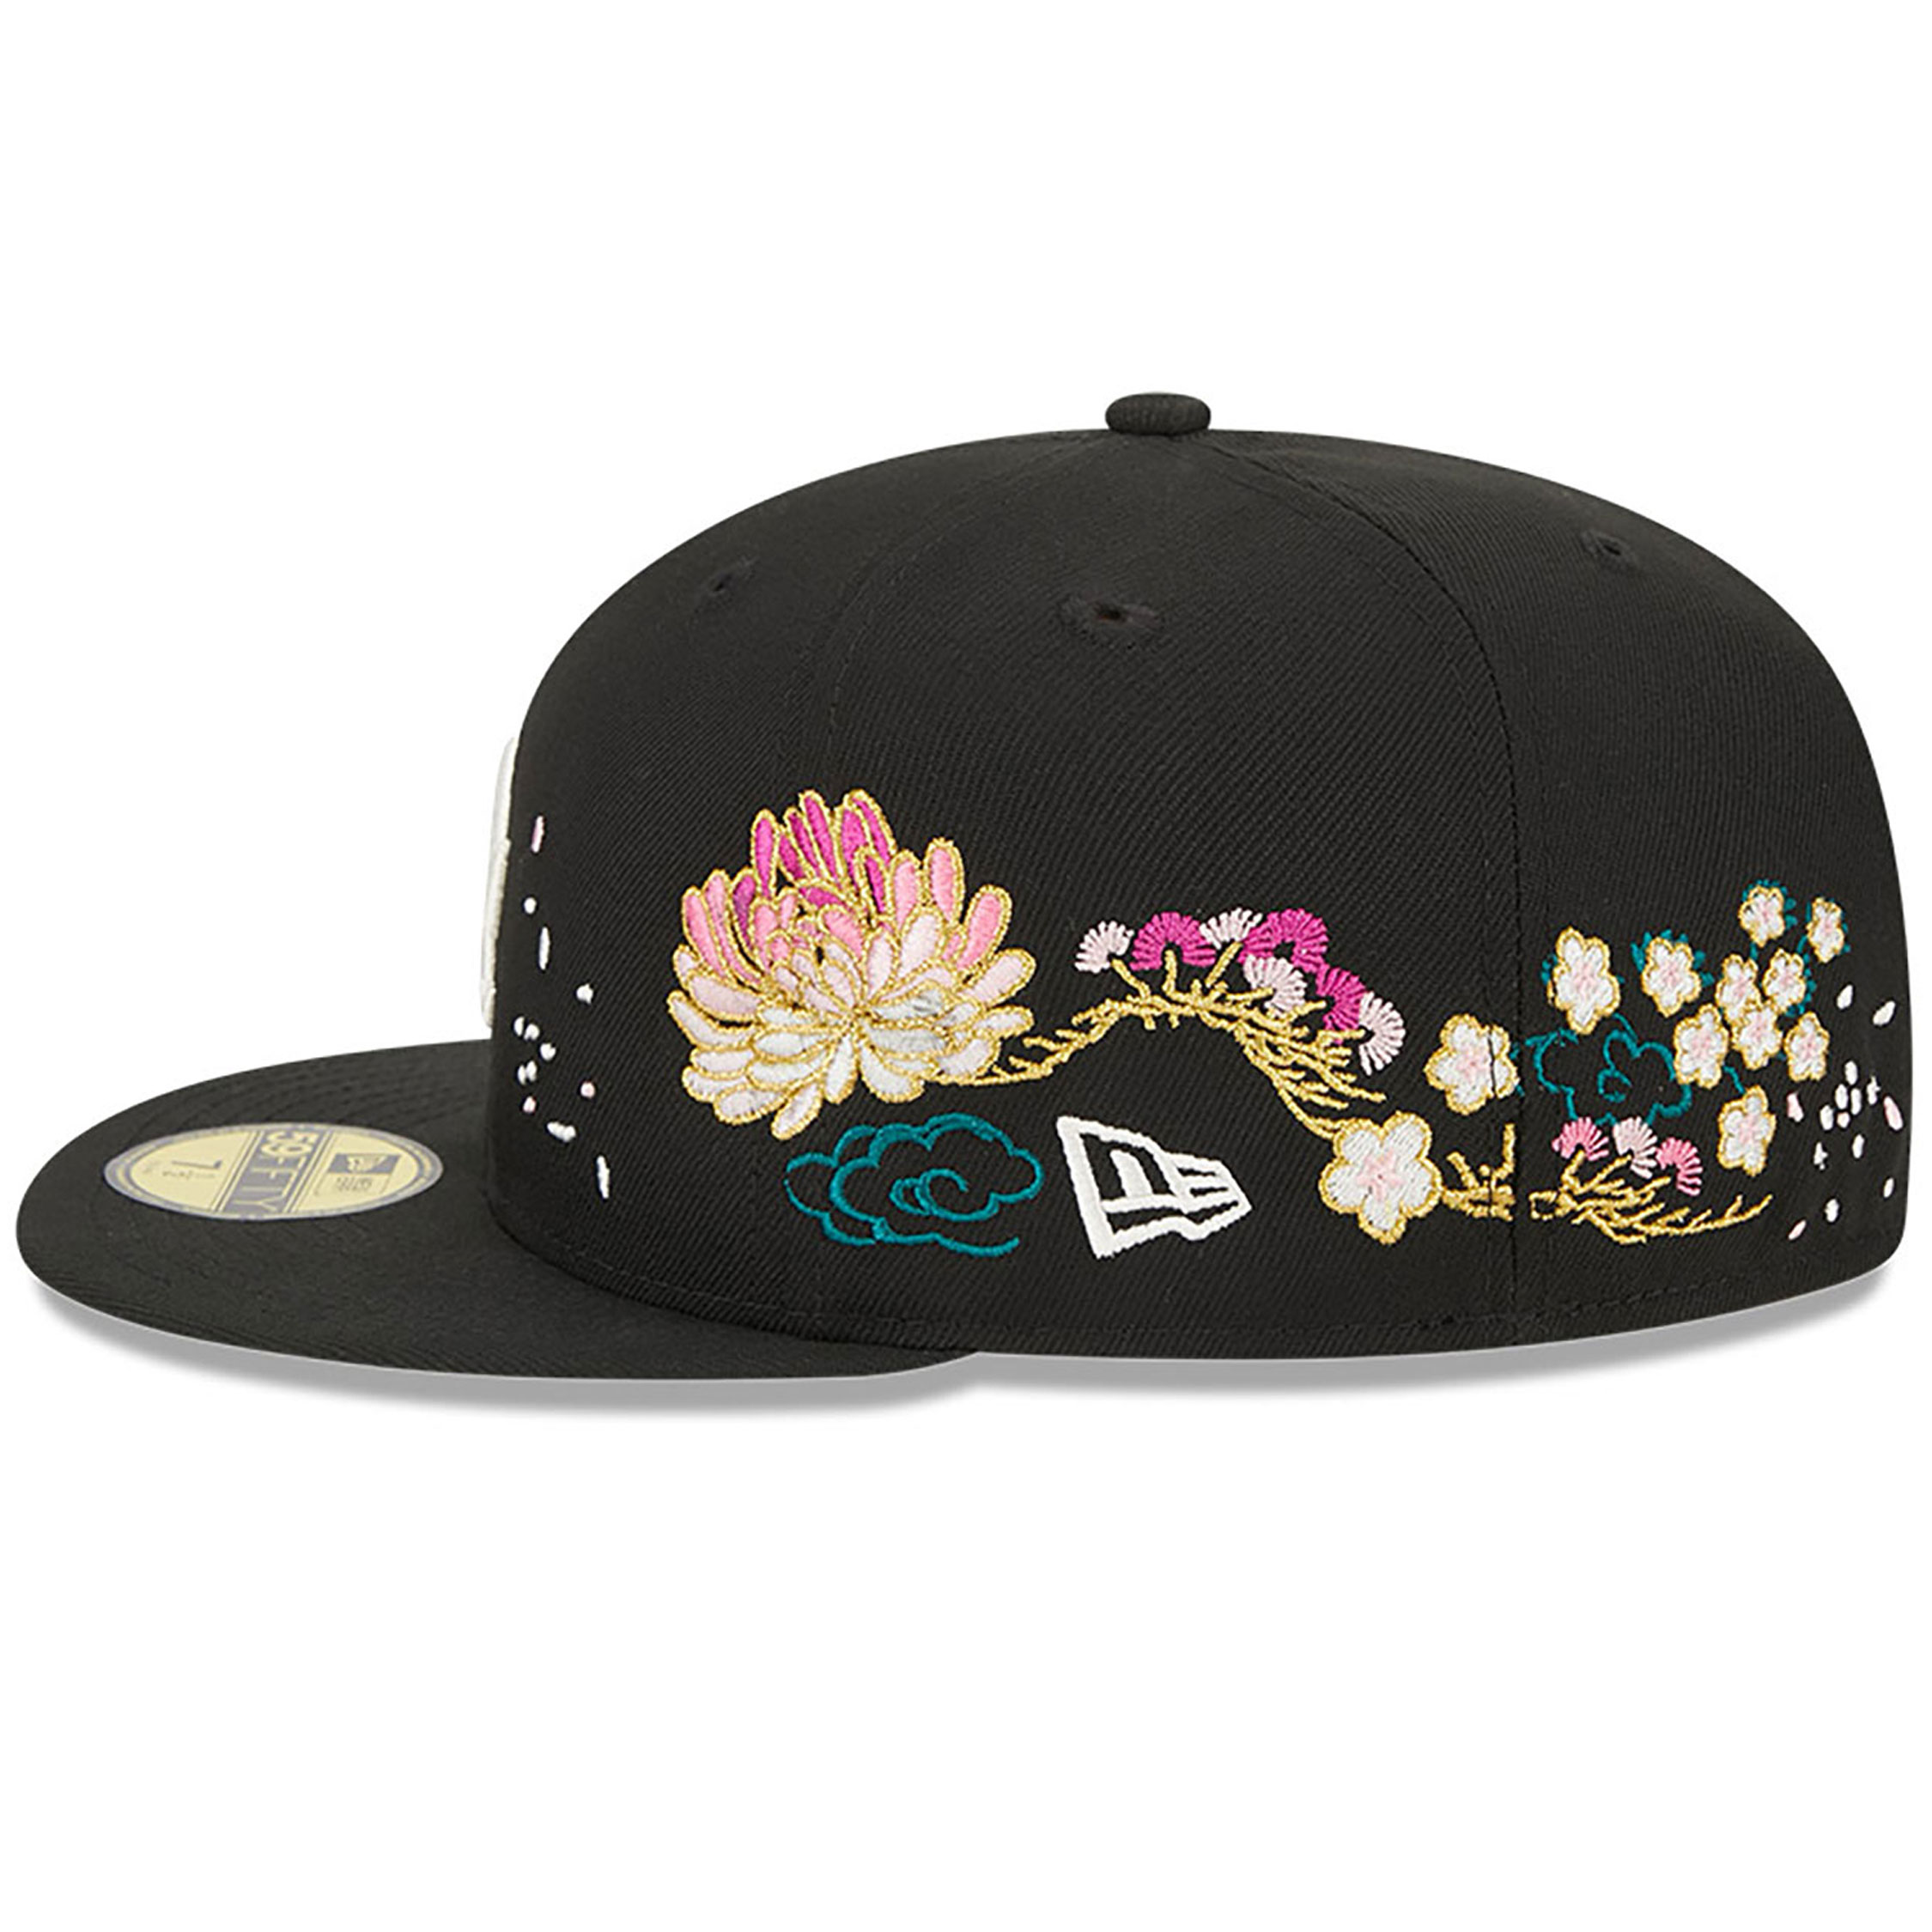 LA Dodgers Cherry Blossom Black 59FIFTY Fitted Cap